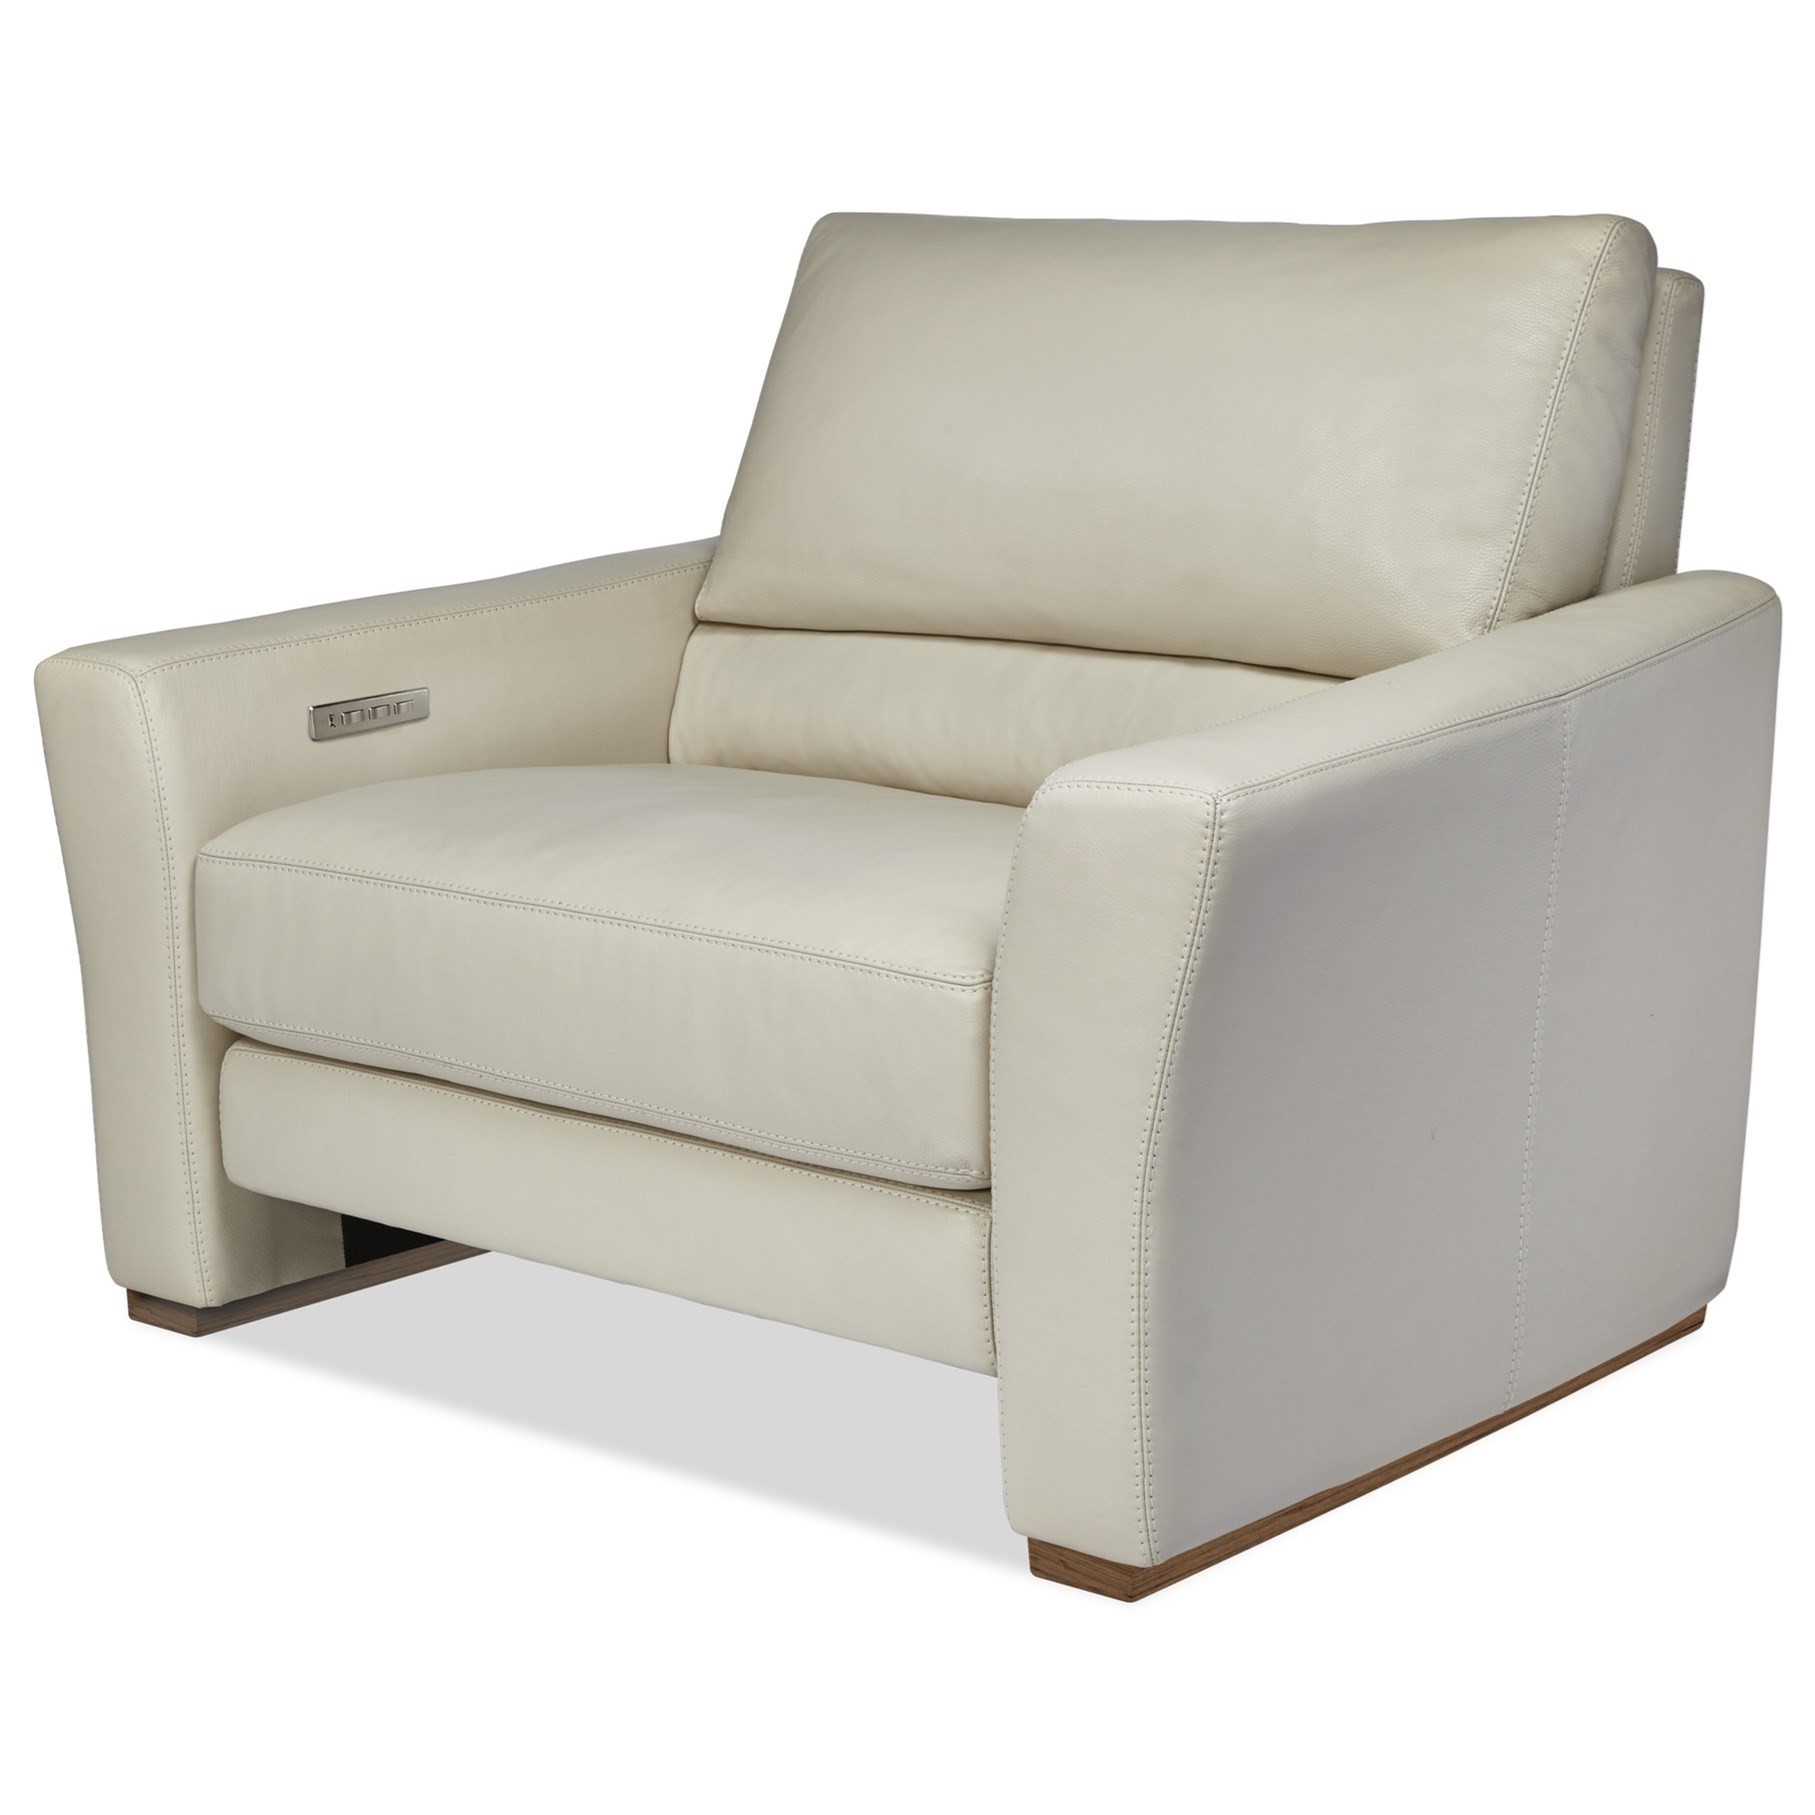 American leather bryant modern power reclining chair and a